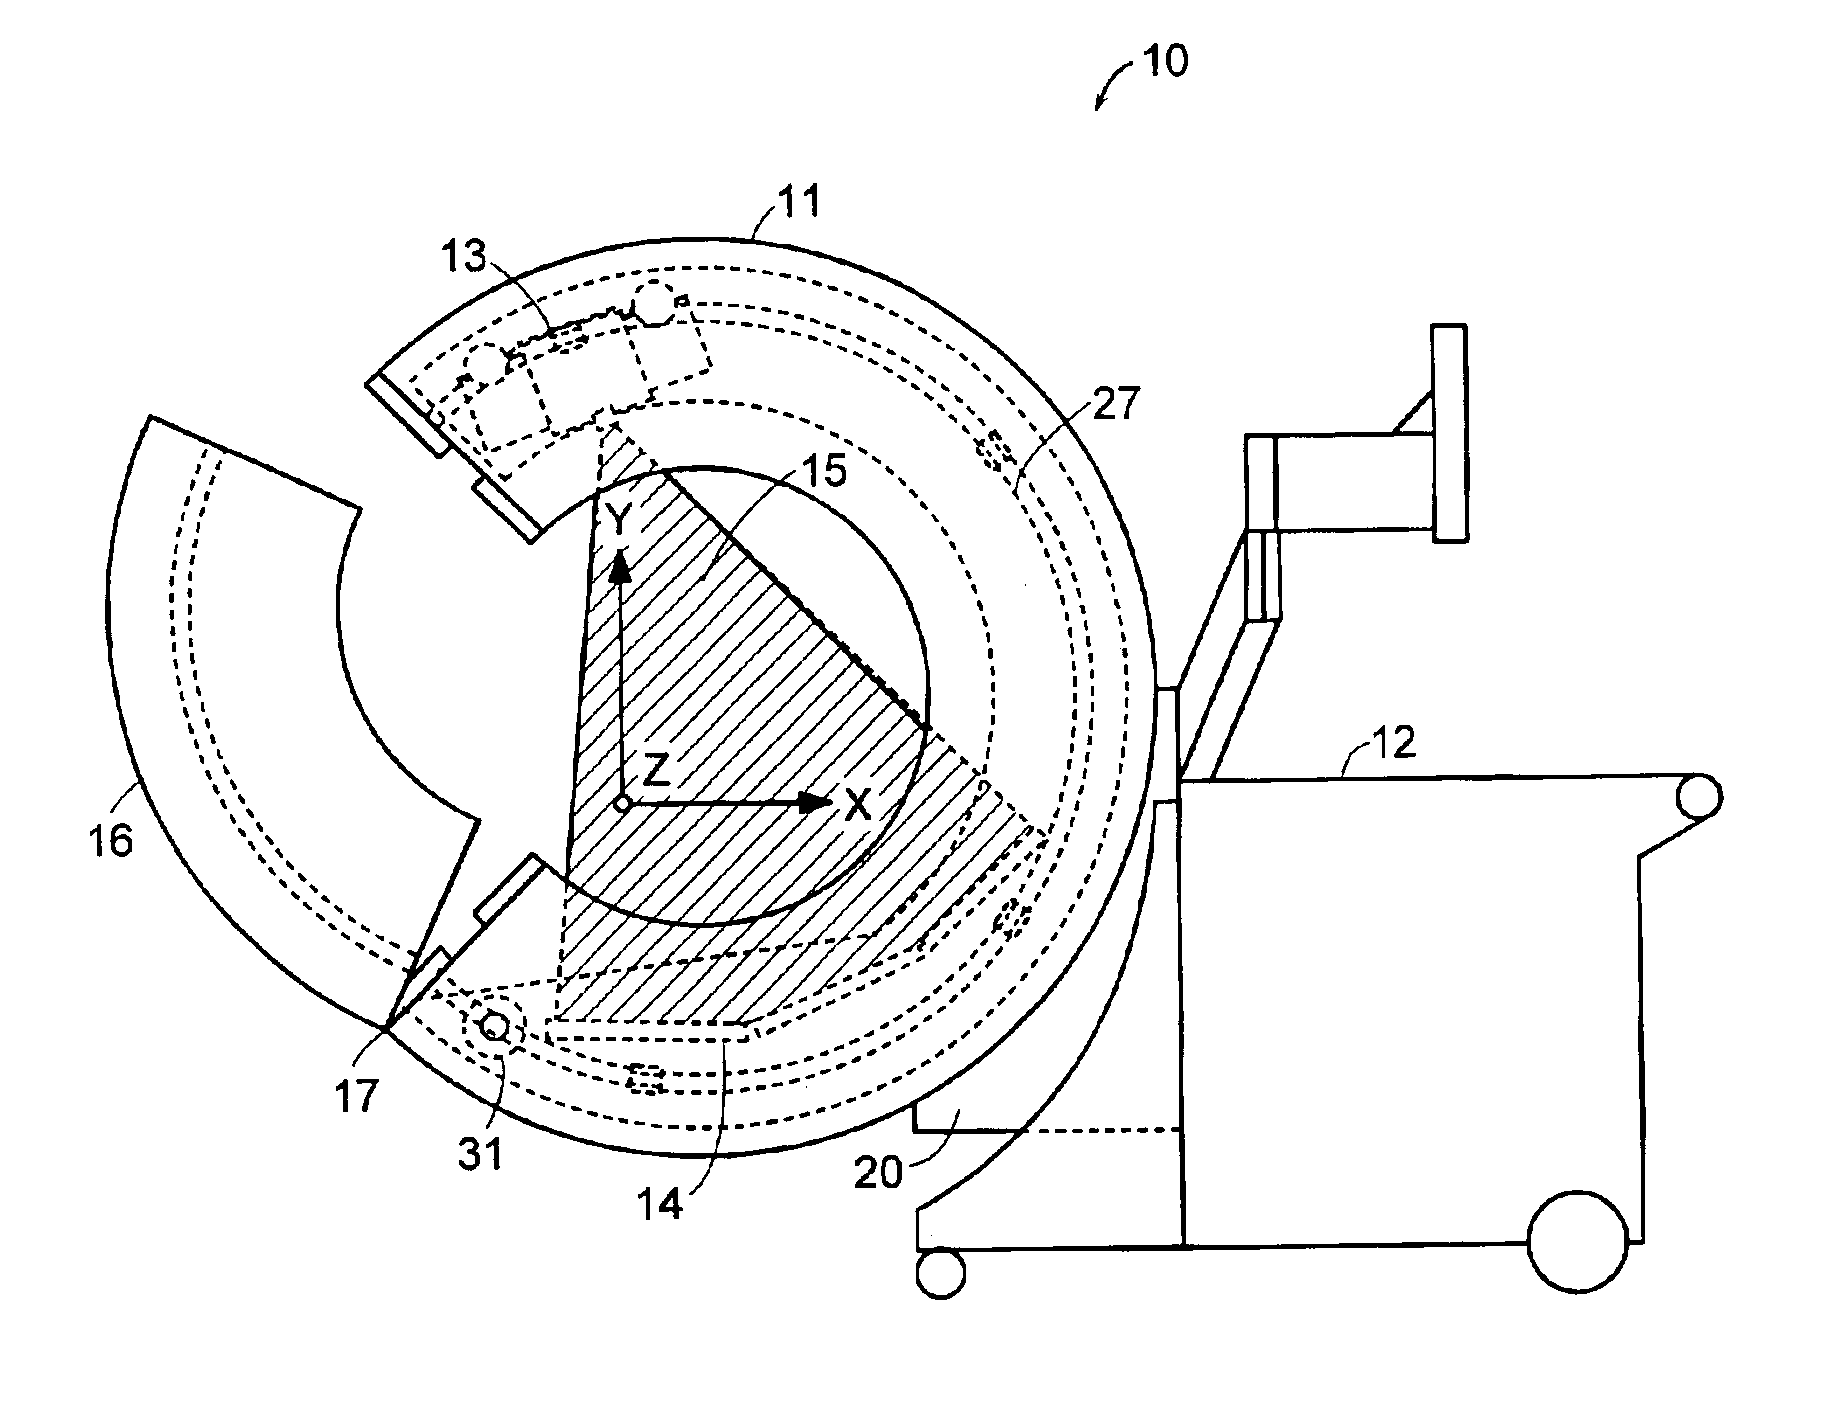 Breakable gantry apparatus for multidimensional x-ray based imaging